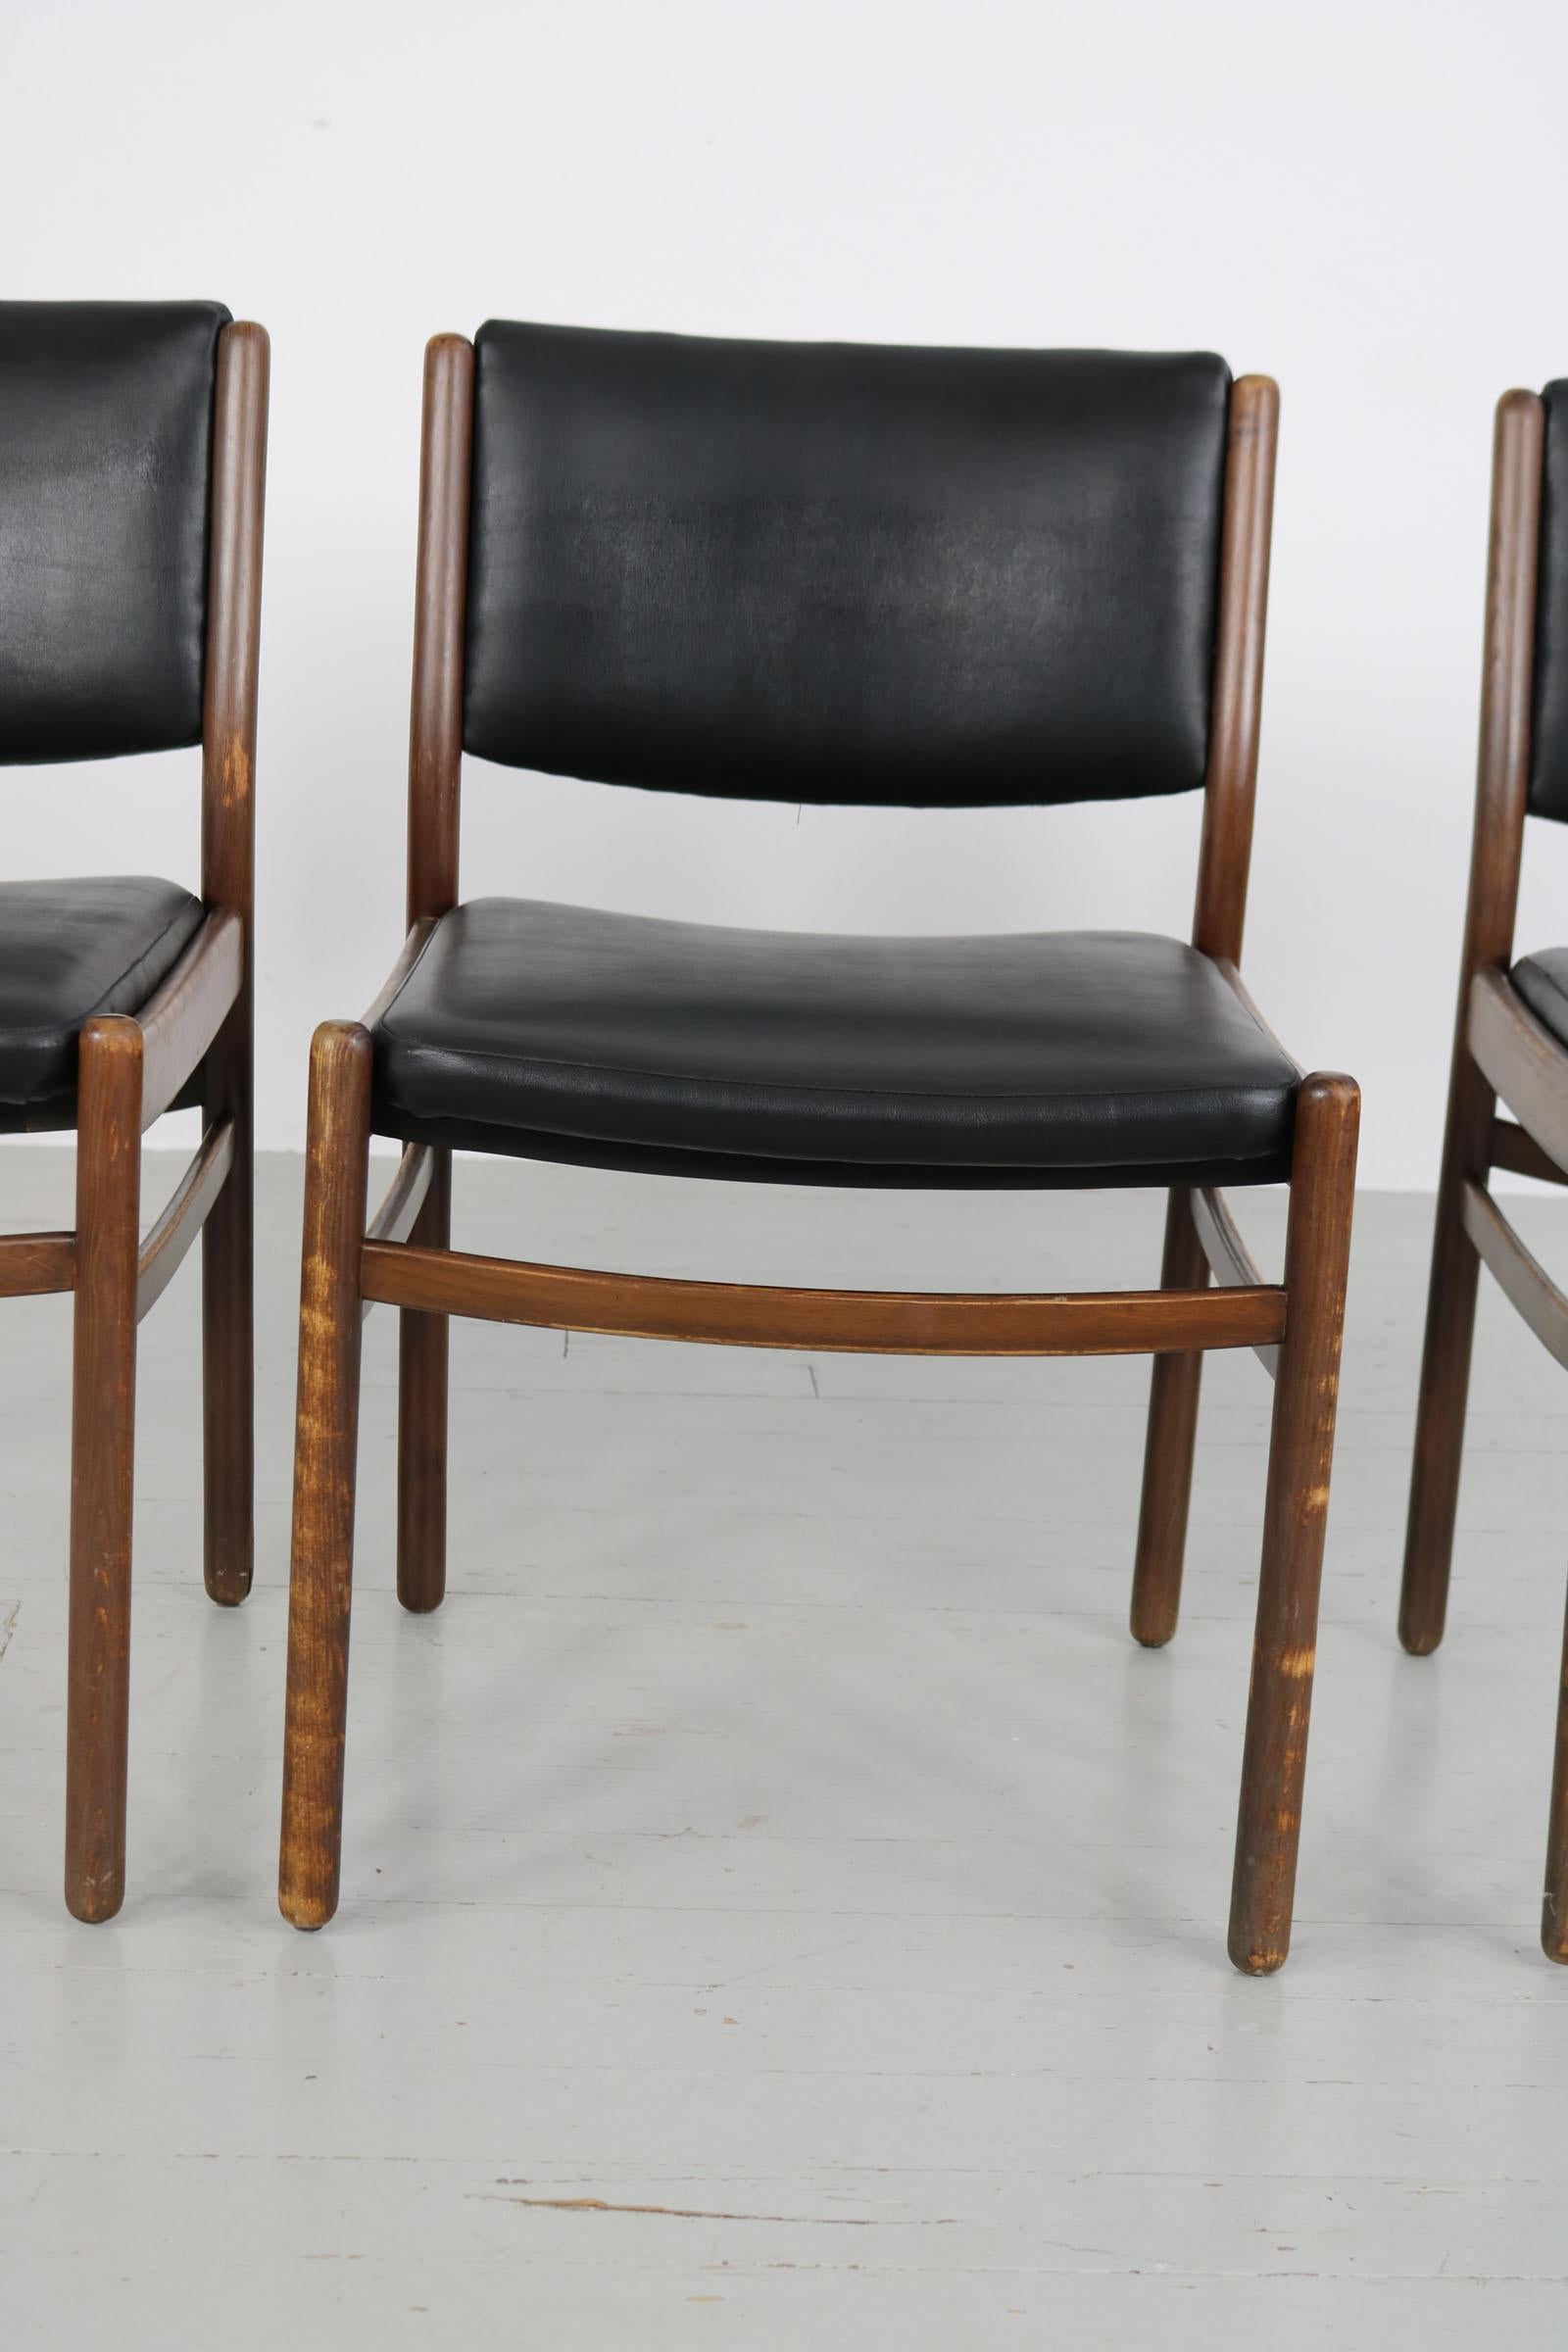 Set of Three Wooden Chairs with Black Leatherette Upholstery, Italy 60s For Sale 3